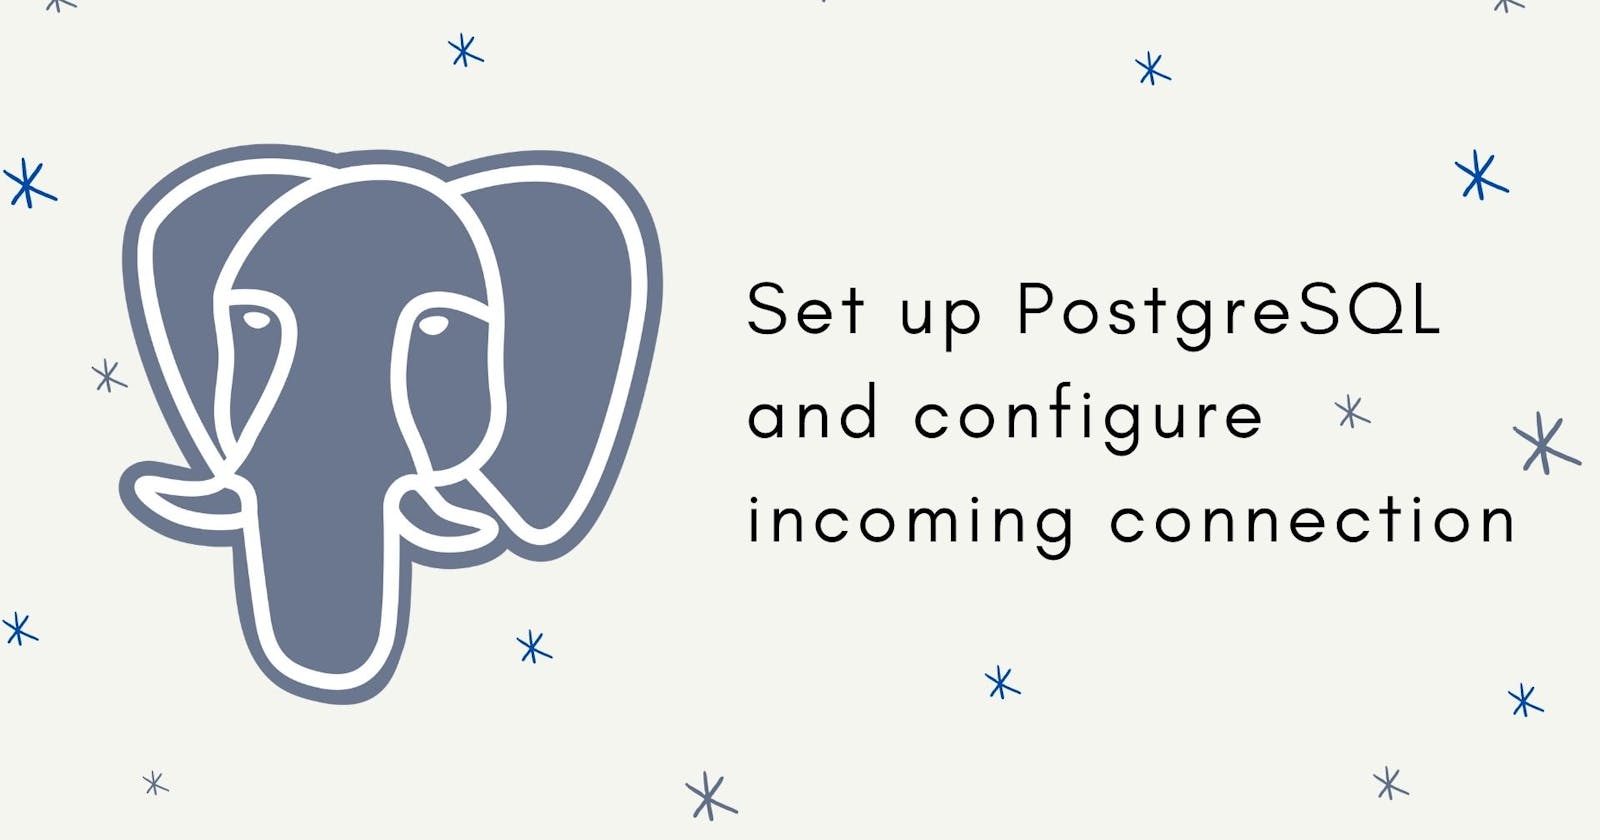 Setting up PostgreSQL and configuring incoming connections